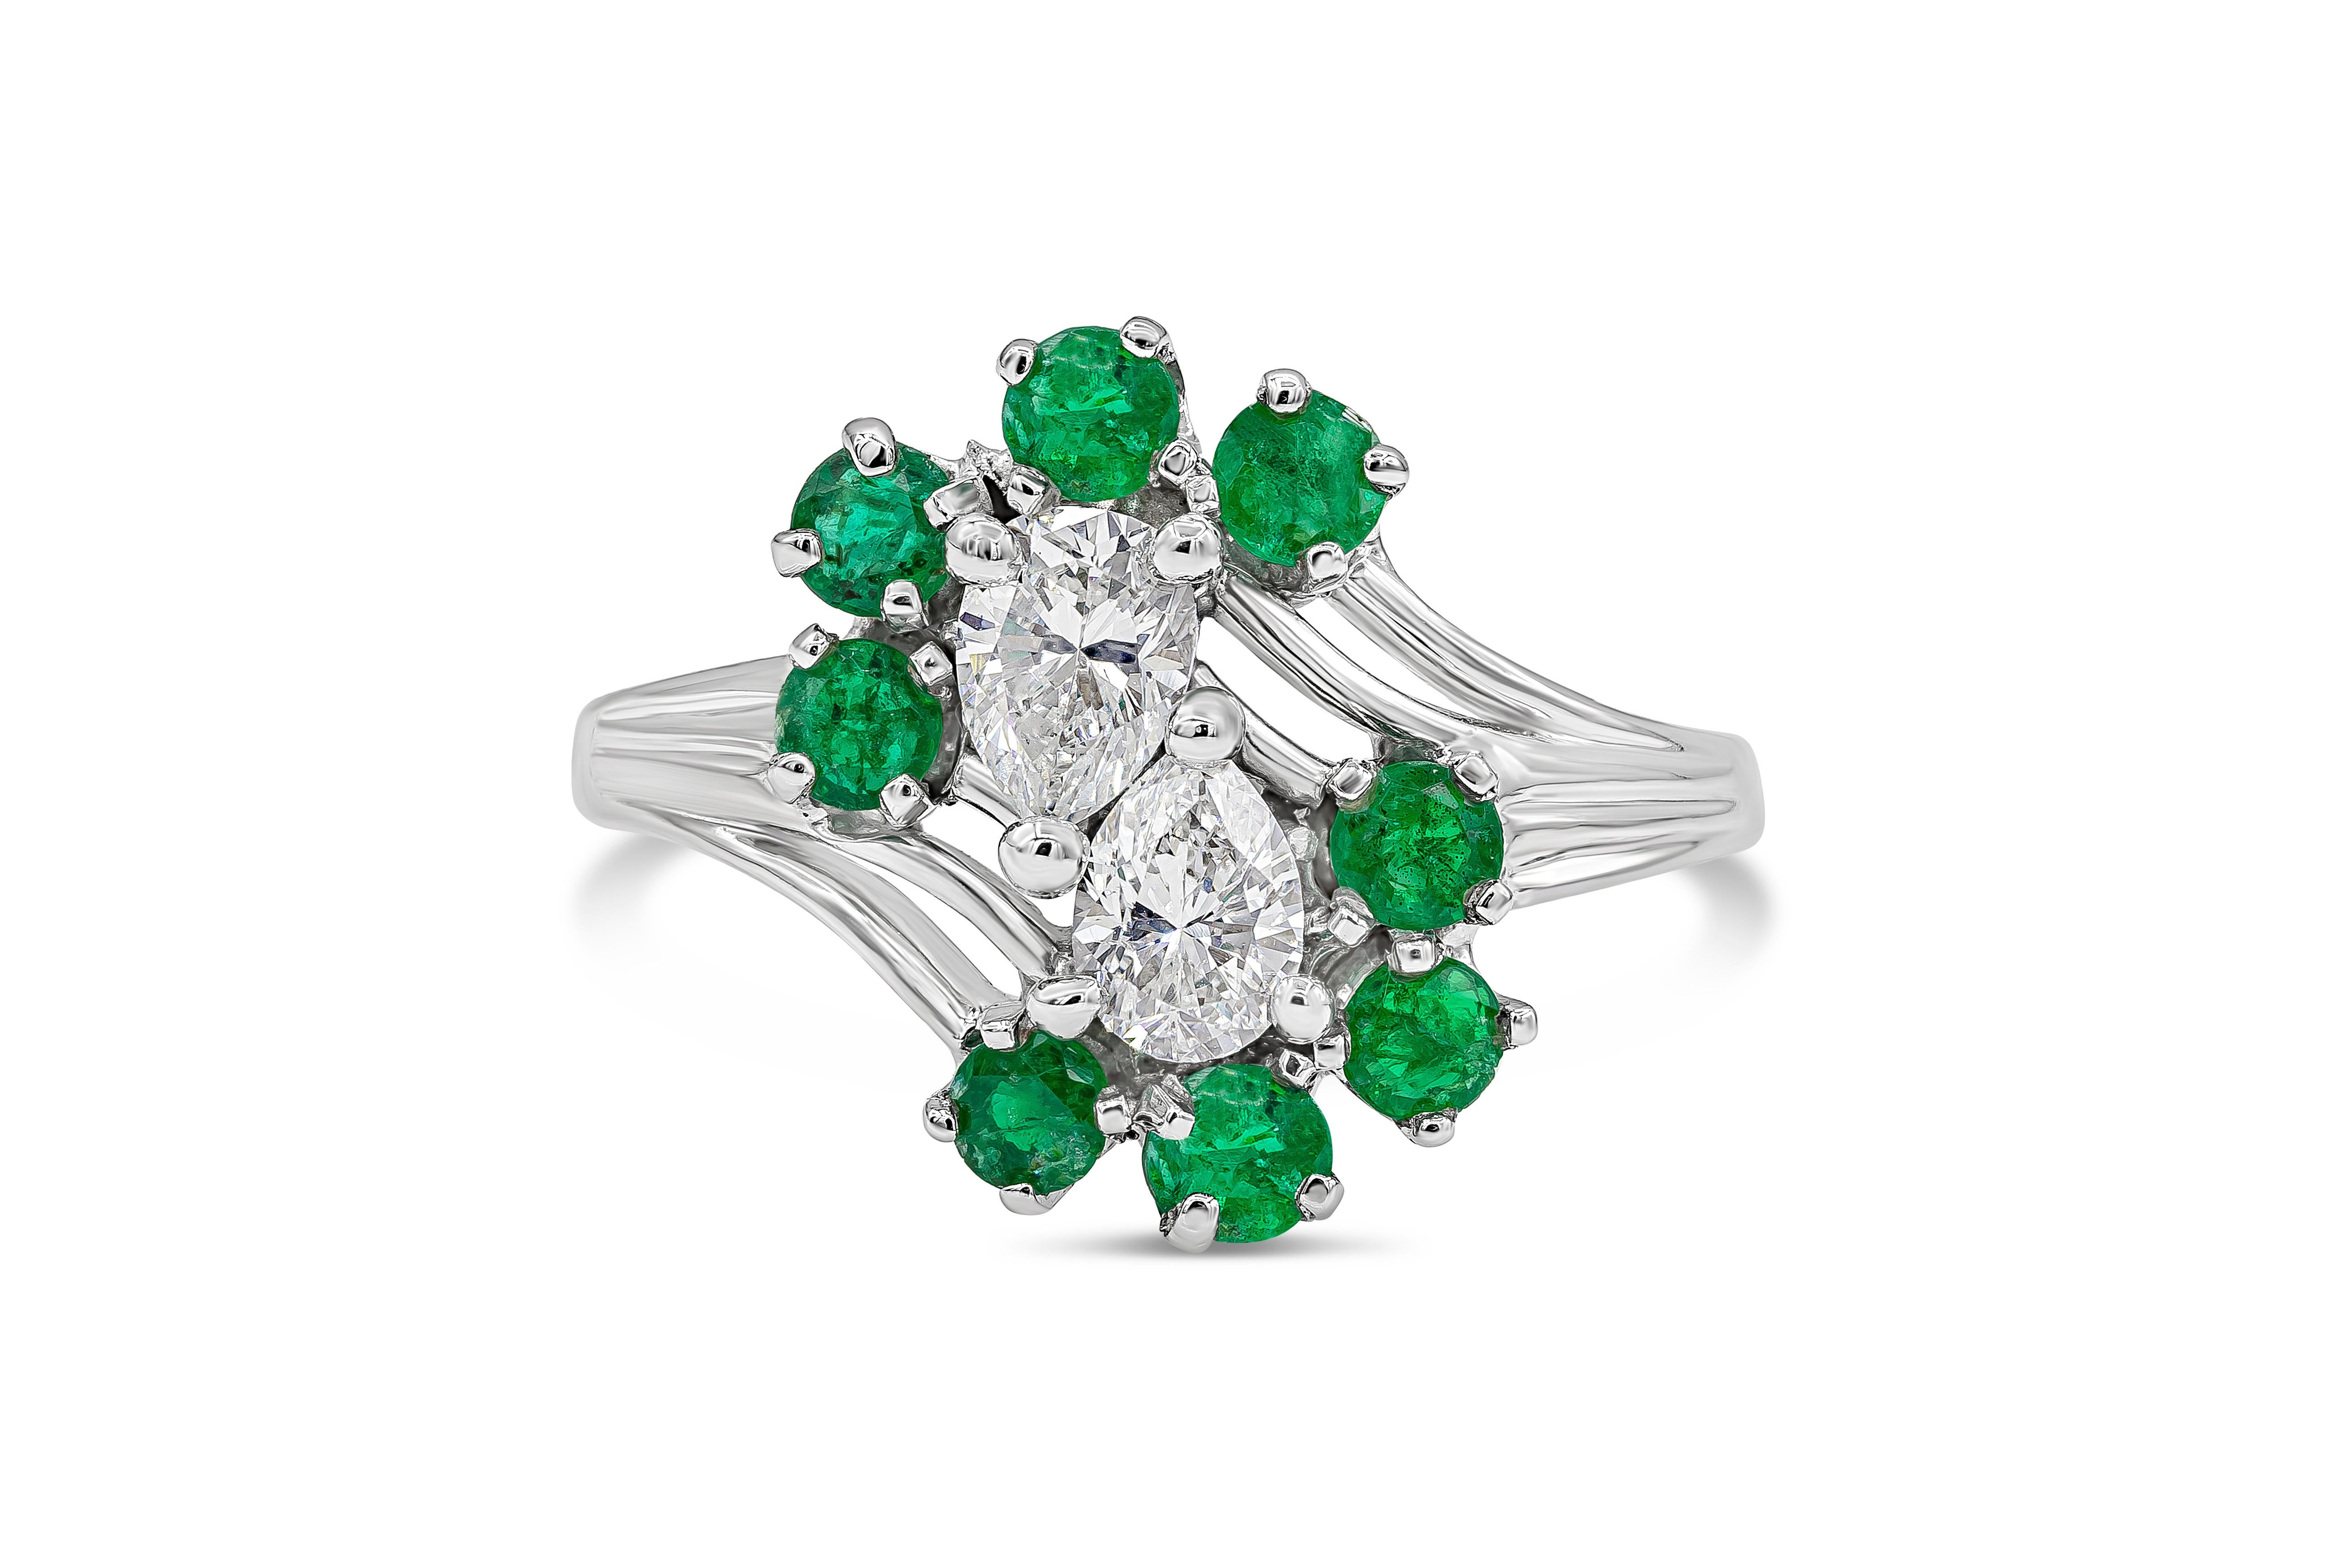 A vintage fashion ring showcasing two pear shape diamonds facing opposite each other accented by eight color-rich round cut green emeralds weighing 0.55 carats total. Diamonds weighs 0.50 carats total, FG color and VS-SI in clarity. Stones are set